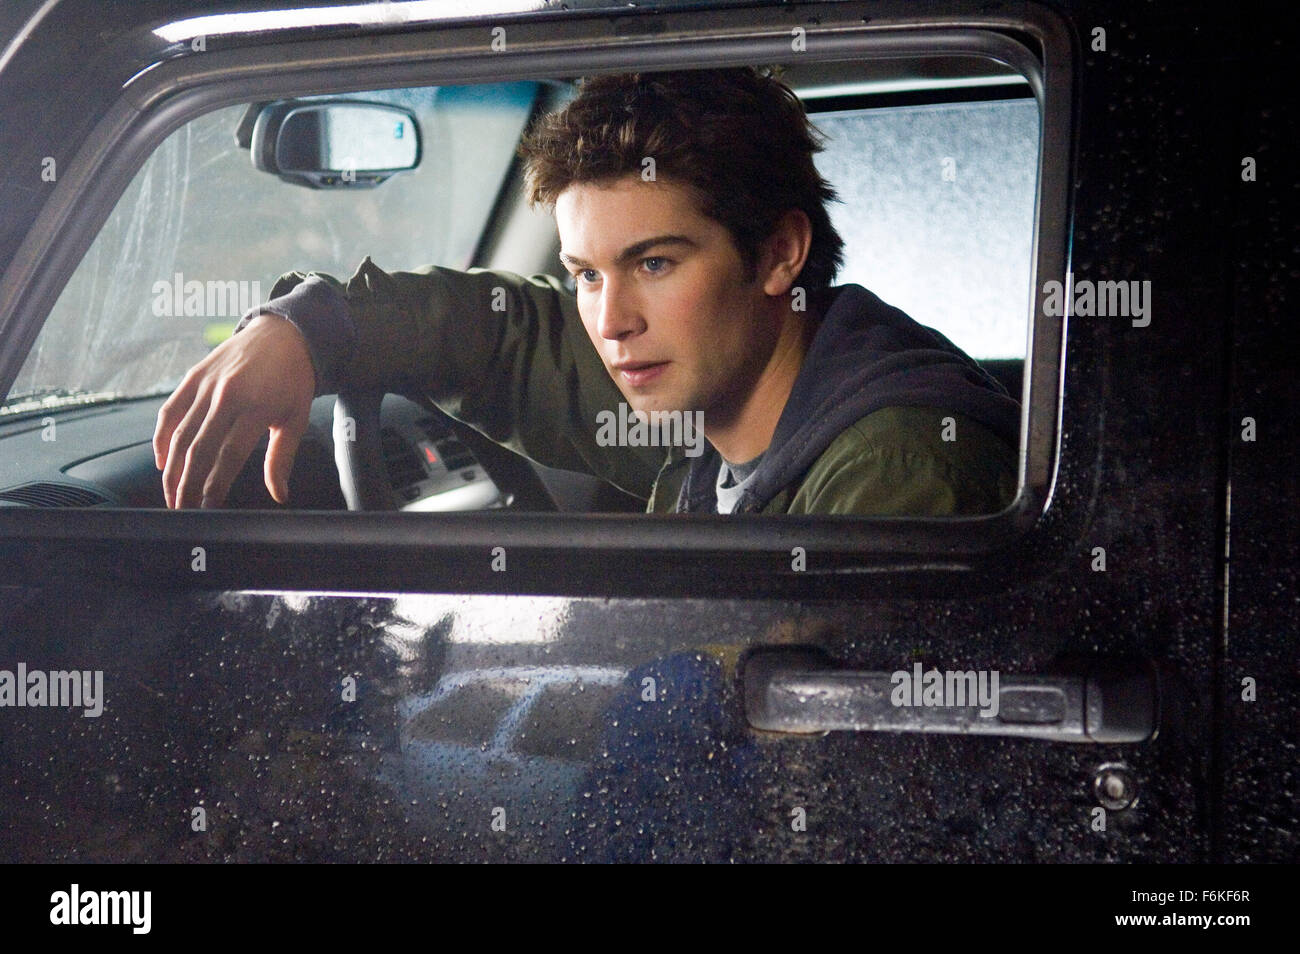 RELEASE DATE: September 8, 2006. MOVIE TITLE: The Covenant. STUDIO: Lakeshore Entertainment. PLOT: Four young men who belong to a supernatural legacy are charged with stopping the evil force they released into the world years earlier. PICTURED: CHACE CRAWFORD as Tyler Sims. Stock Photo